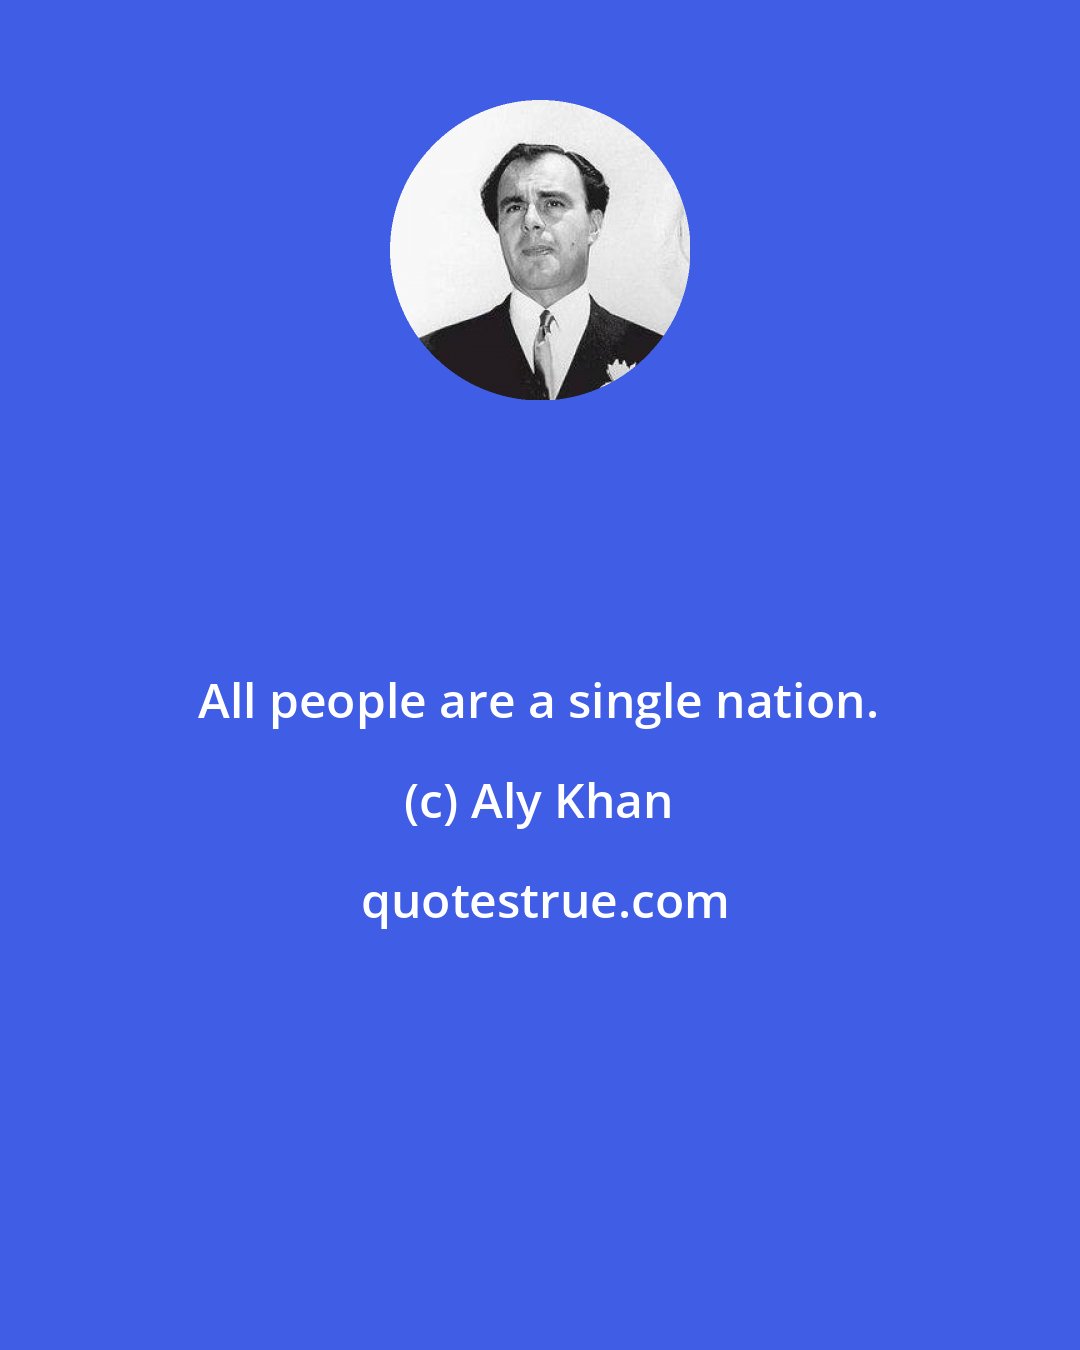 Aly Khan: All people are a single nation.